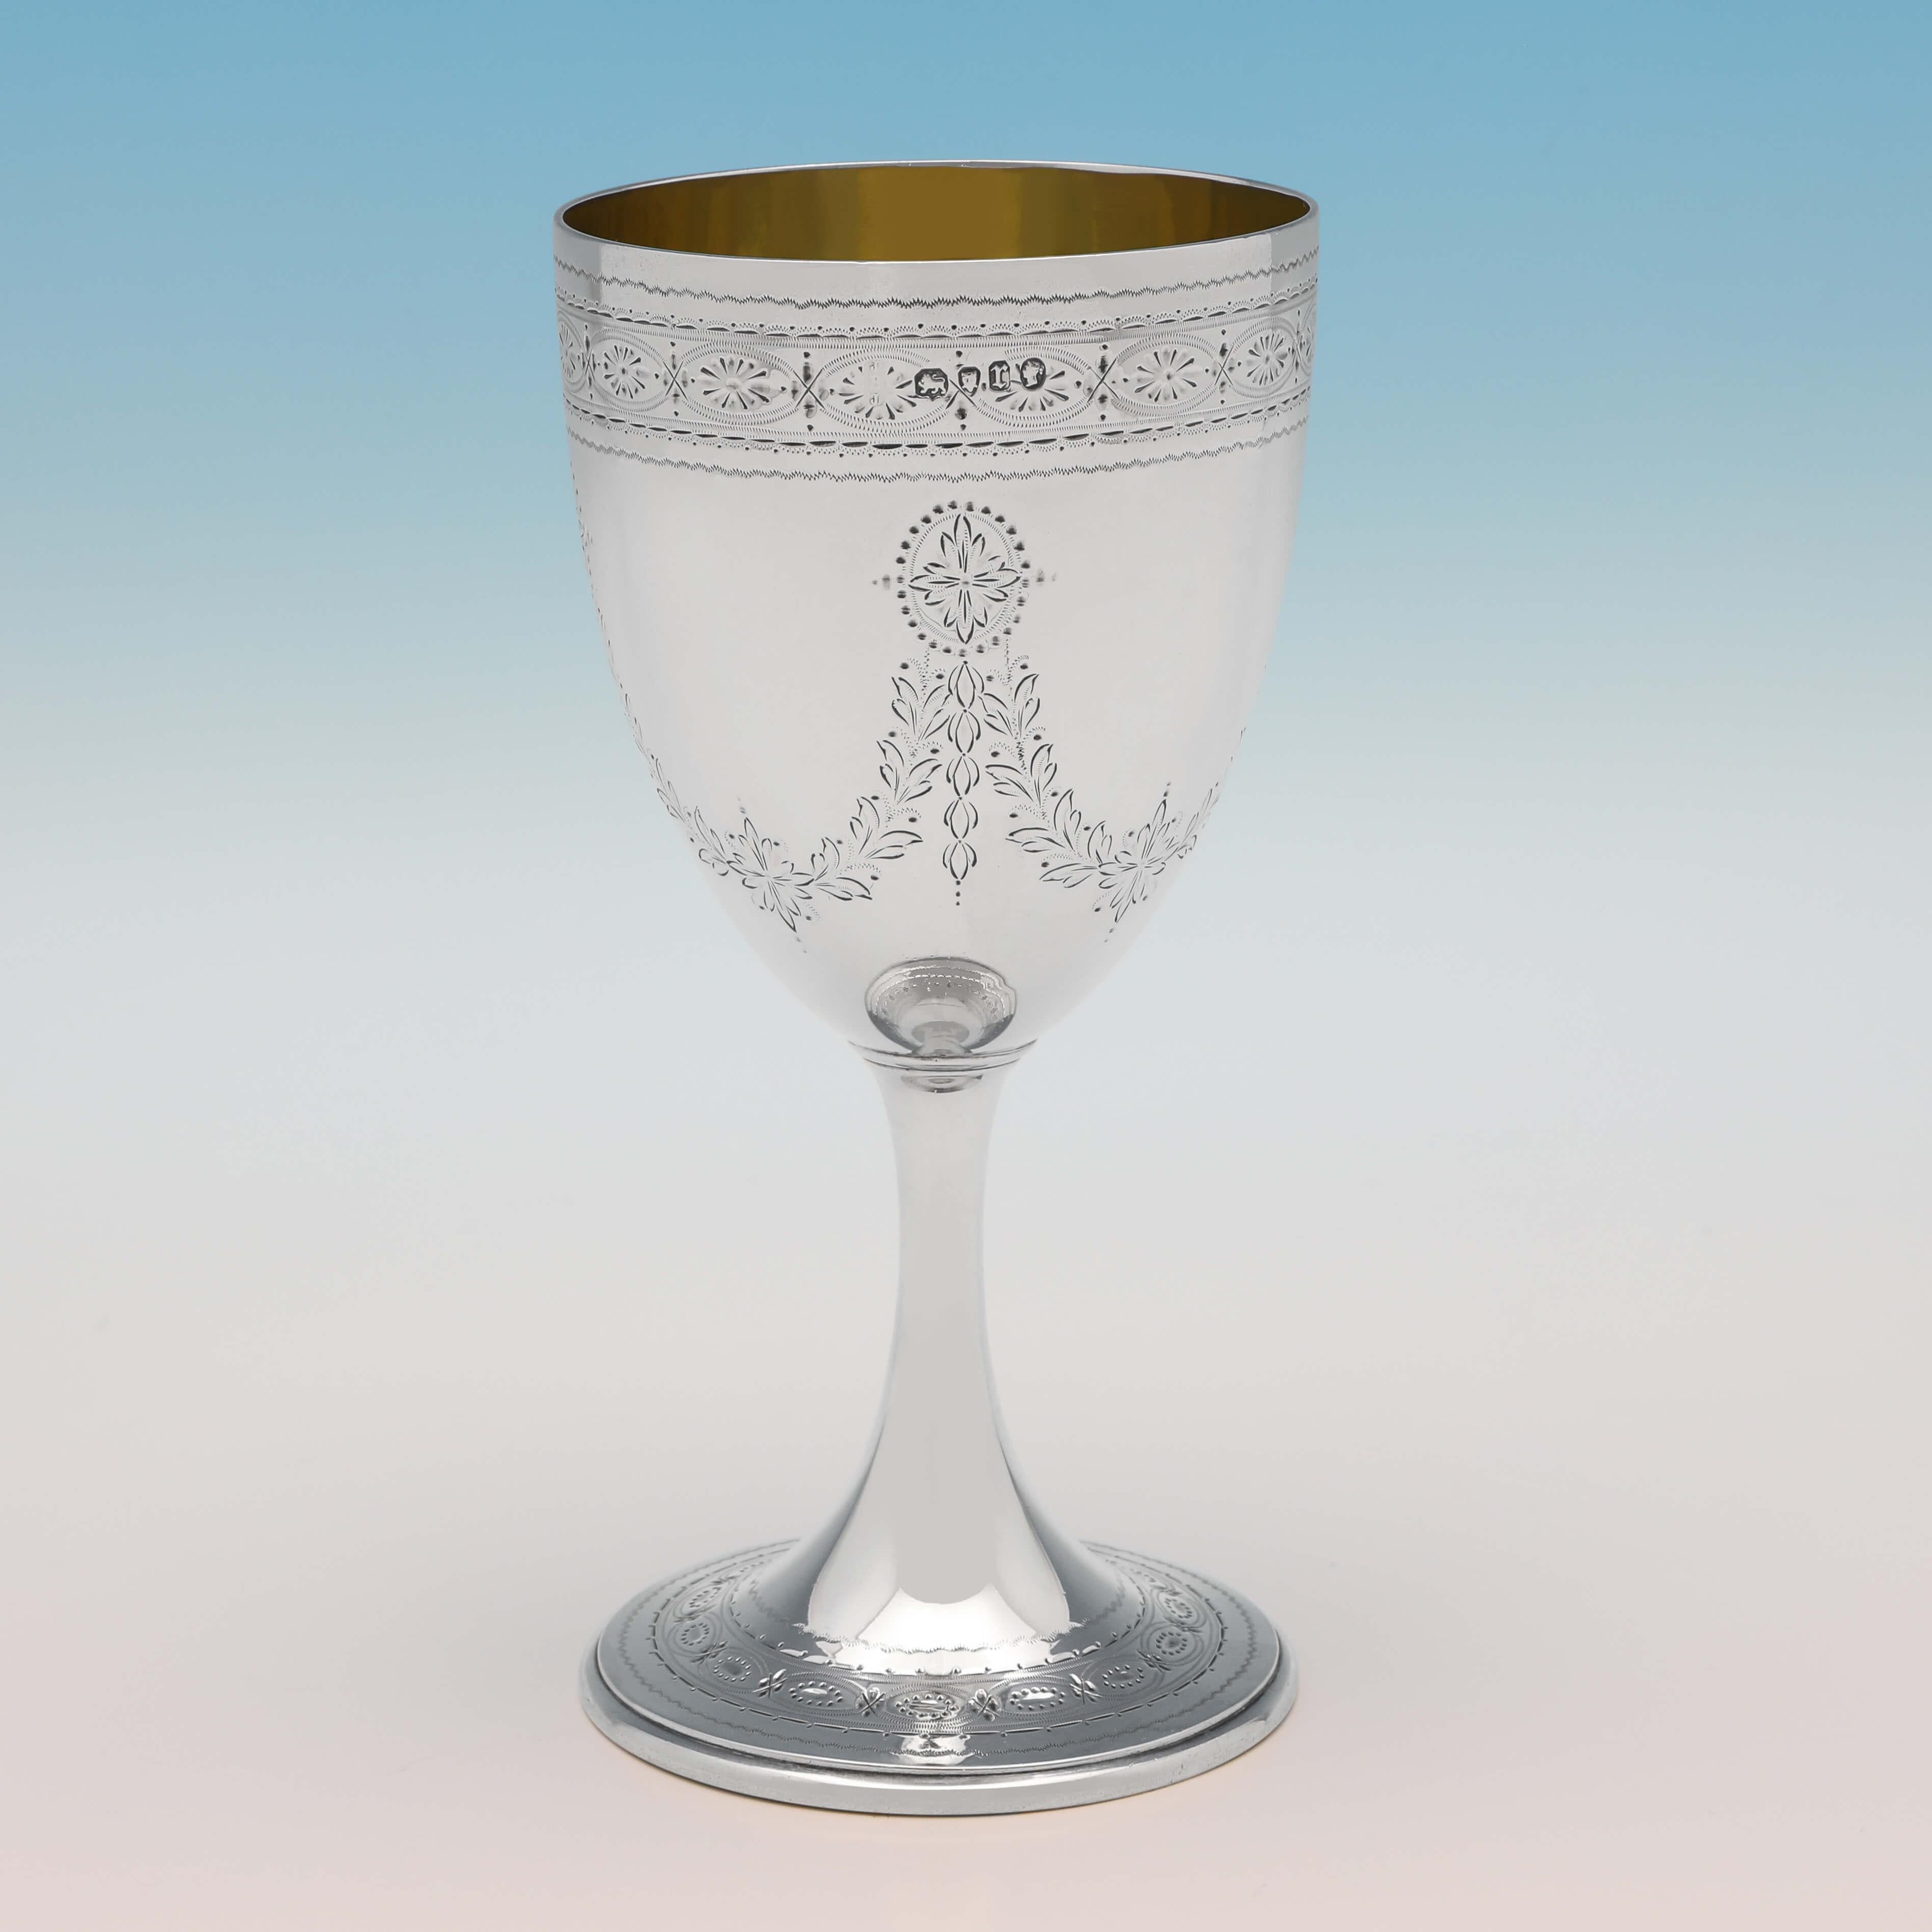 Hallmarked in London in 1872 by Barnards, this attractive, Victorian, antique sterling silver goblet, features bright cut engraved decoration throughout, and a gilt interior. The goblet measures 6.5